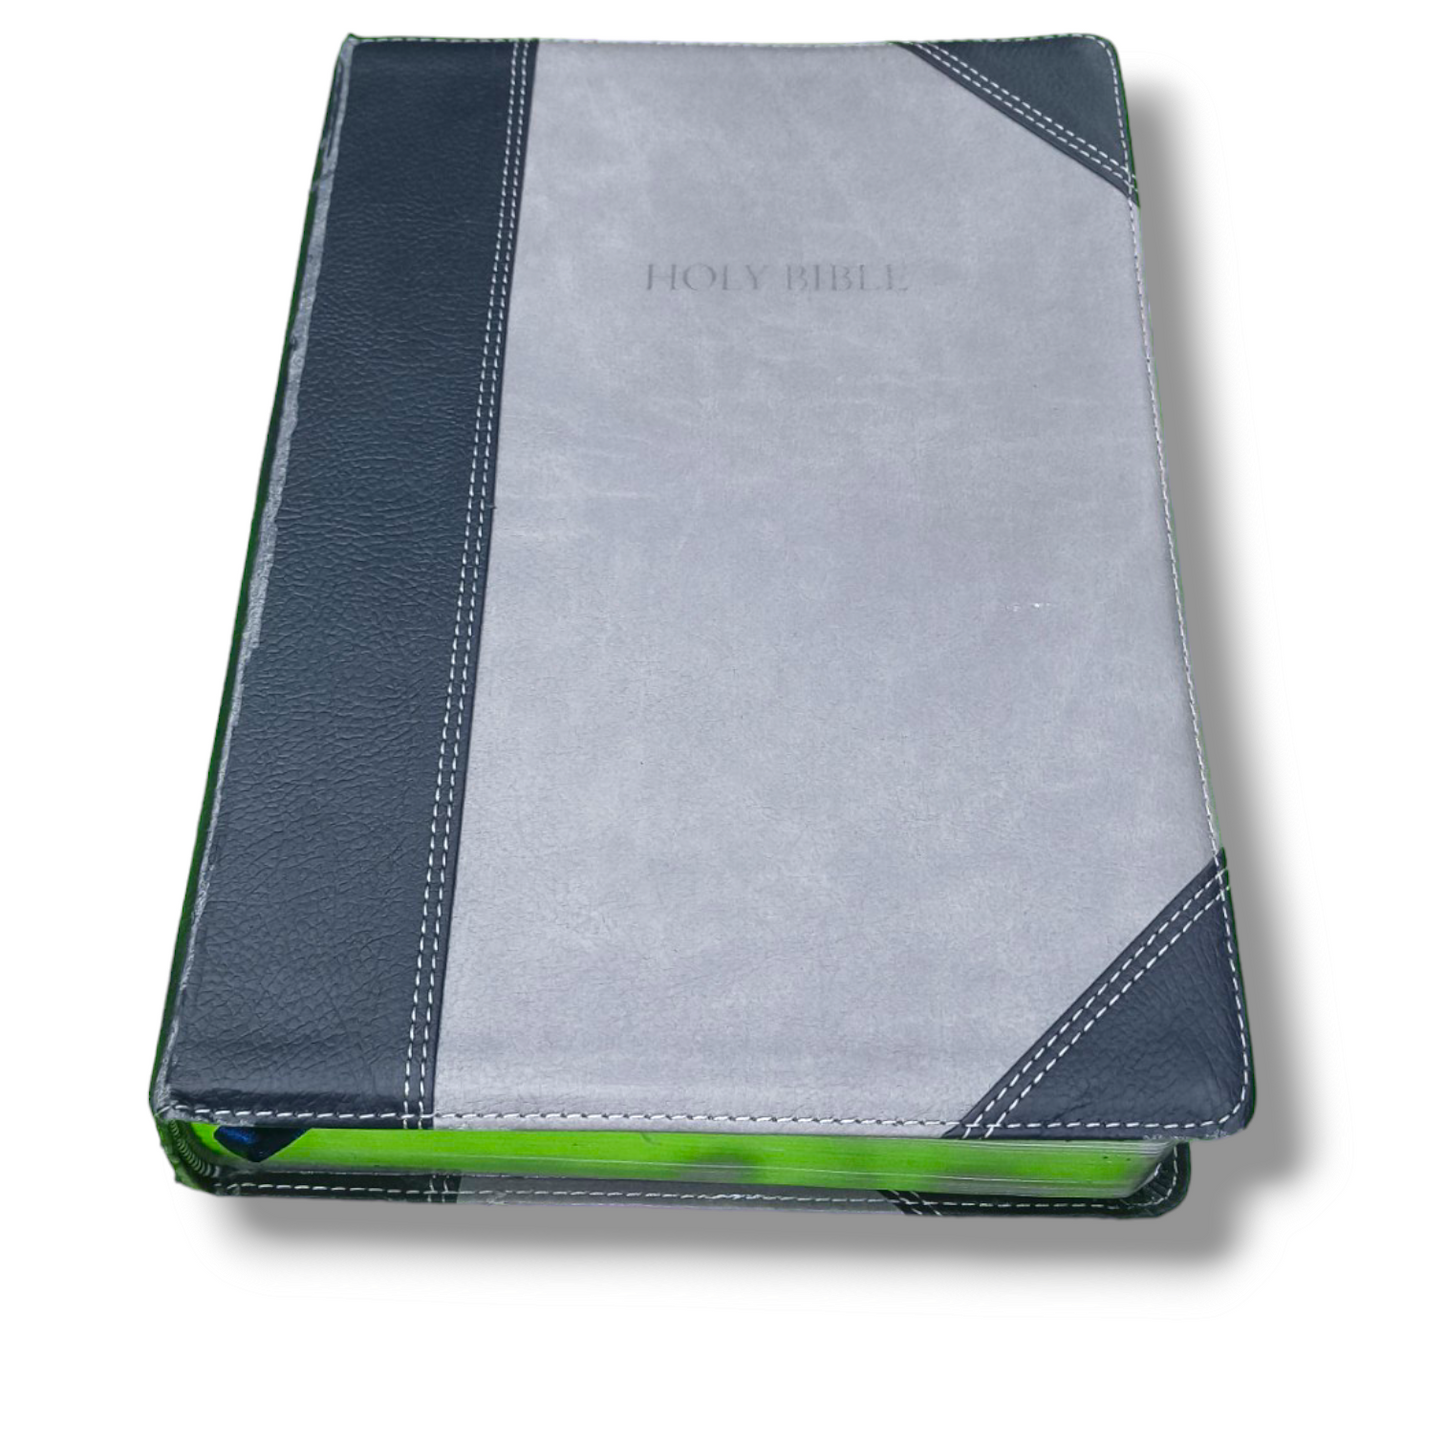 The Matthew Henry Study Bible | Hard Bound Edition | With Thumb Index | New Edition